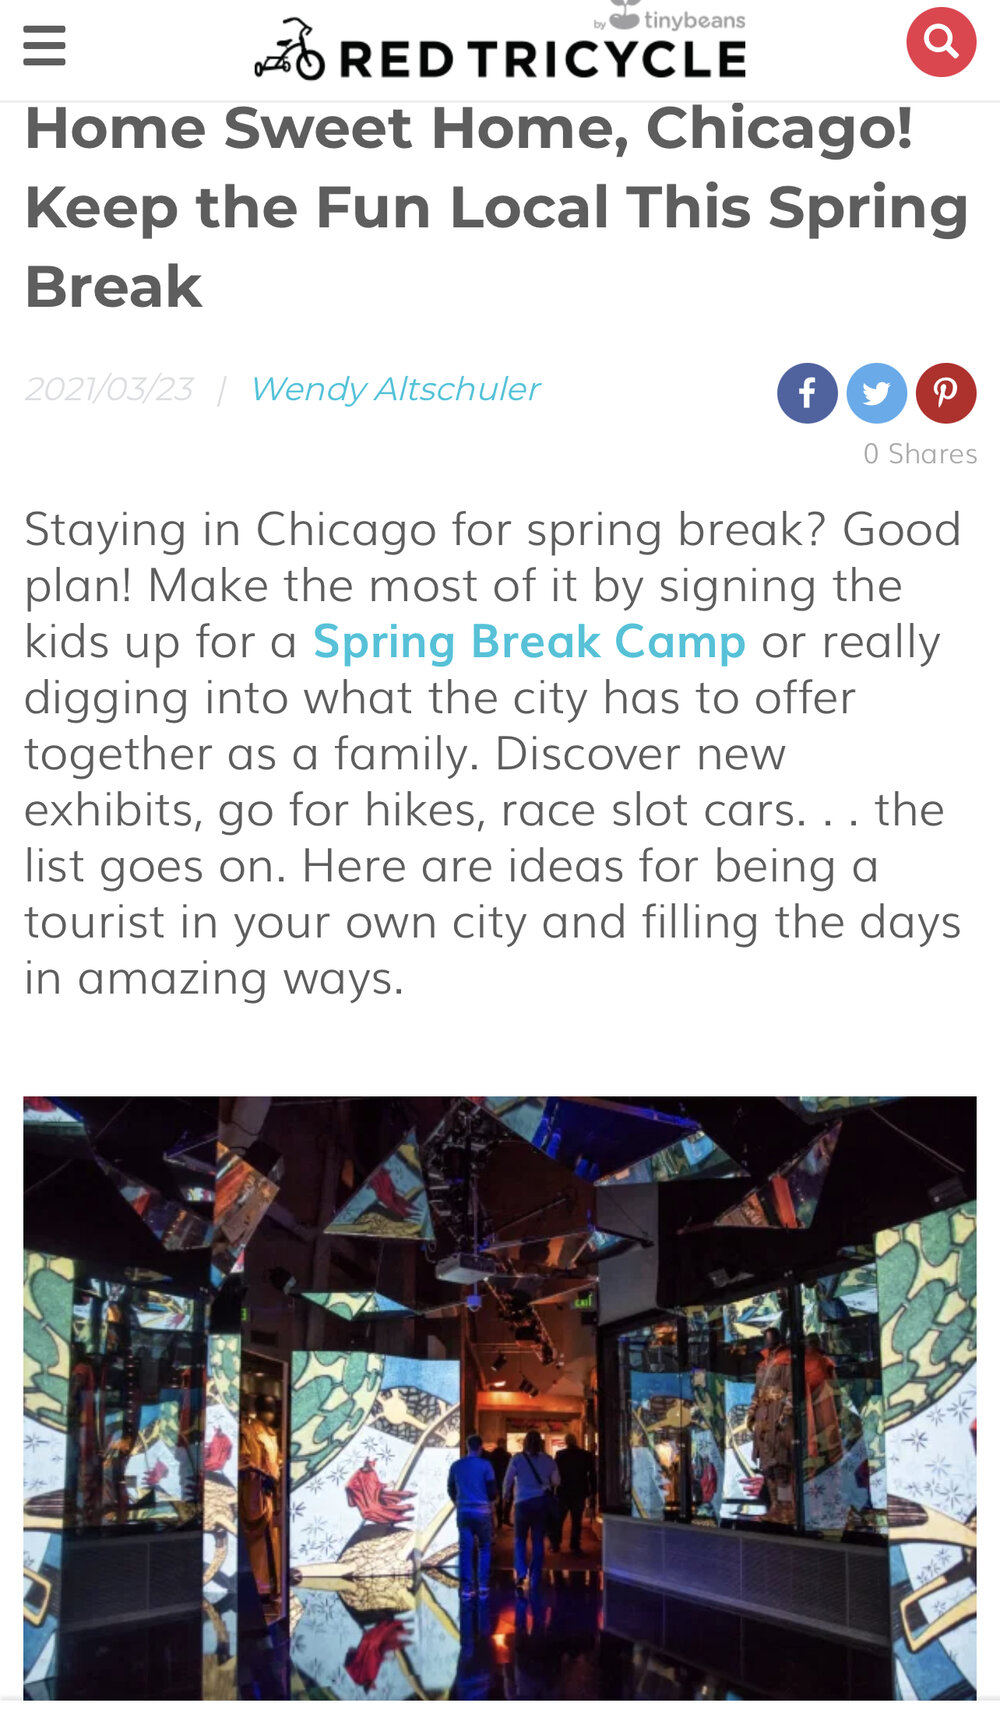 Home Sweet Home, Chicago! Keep the Fun Local This Spring Break